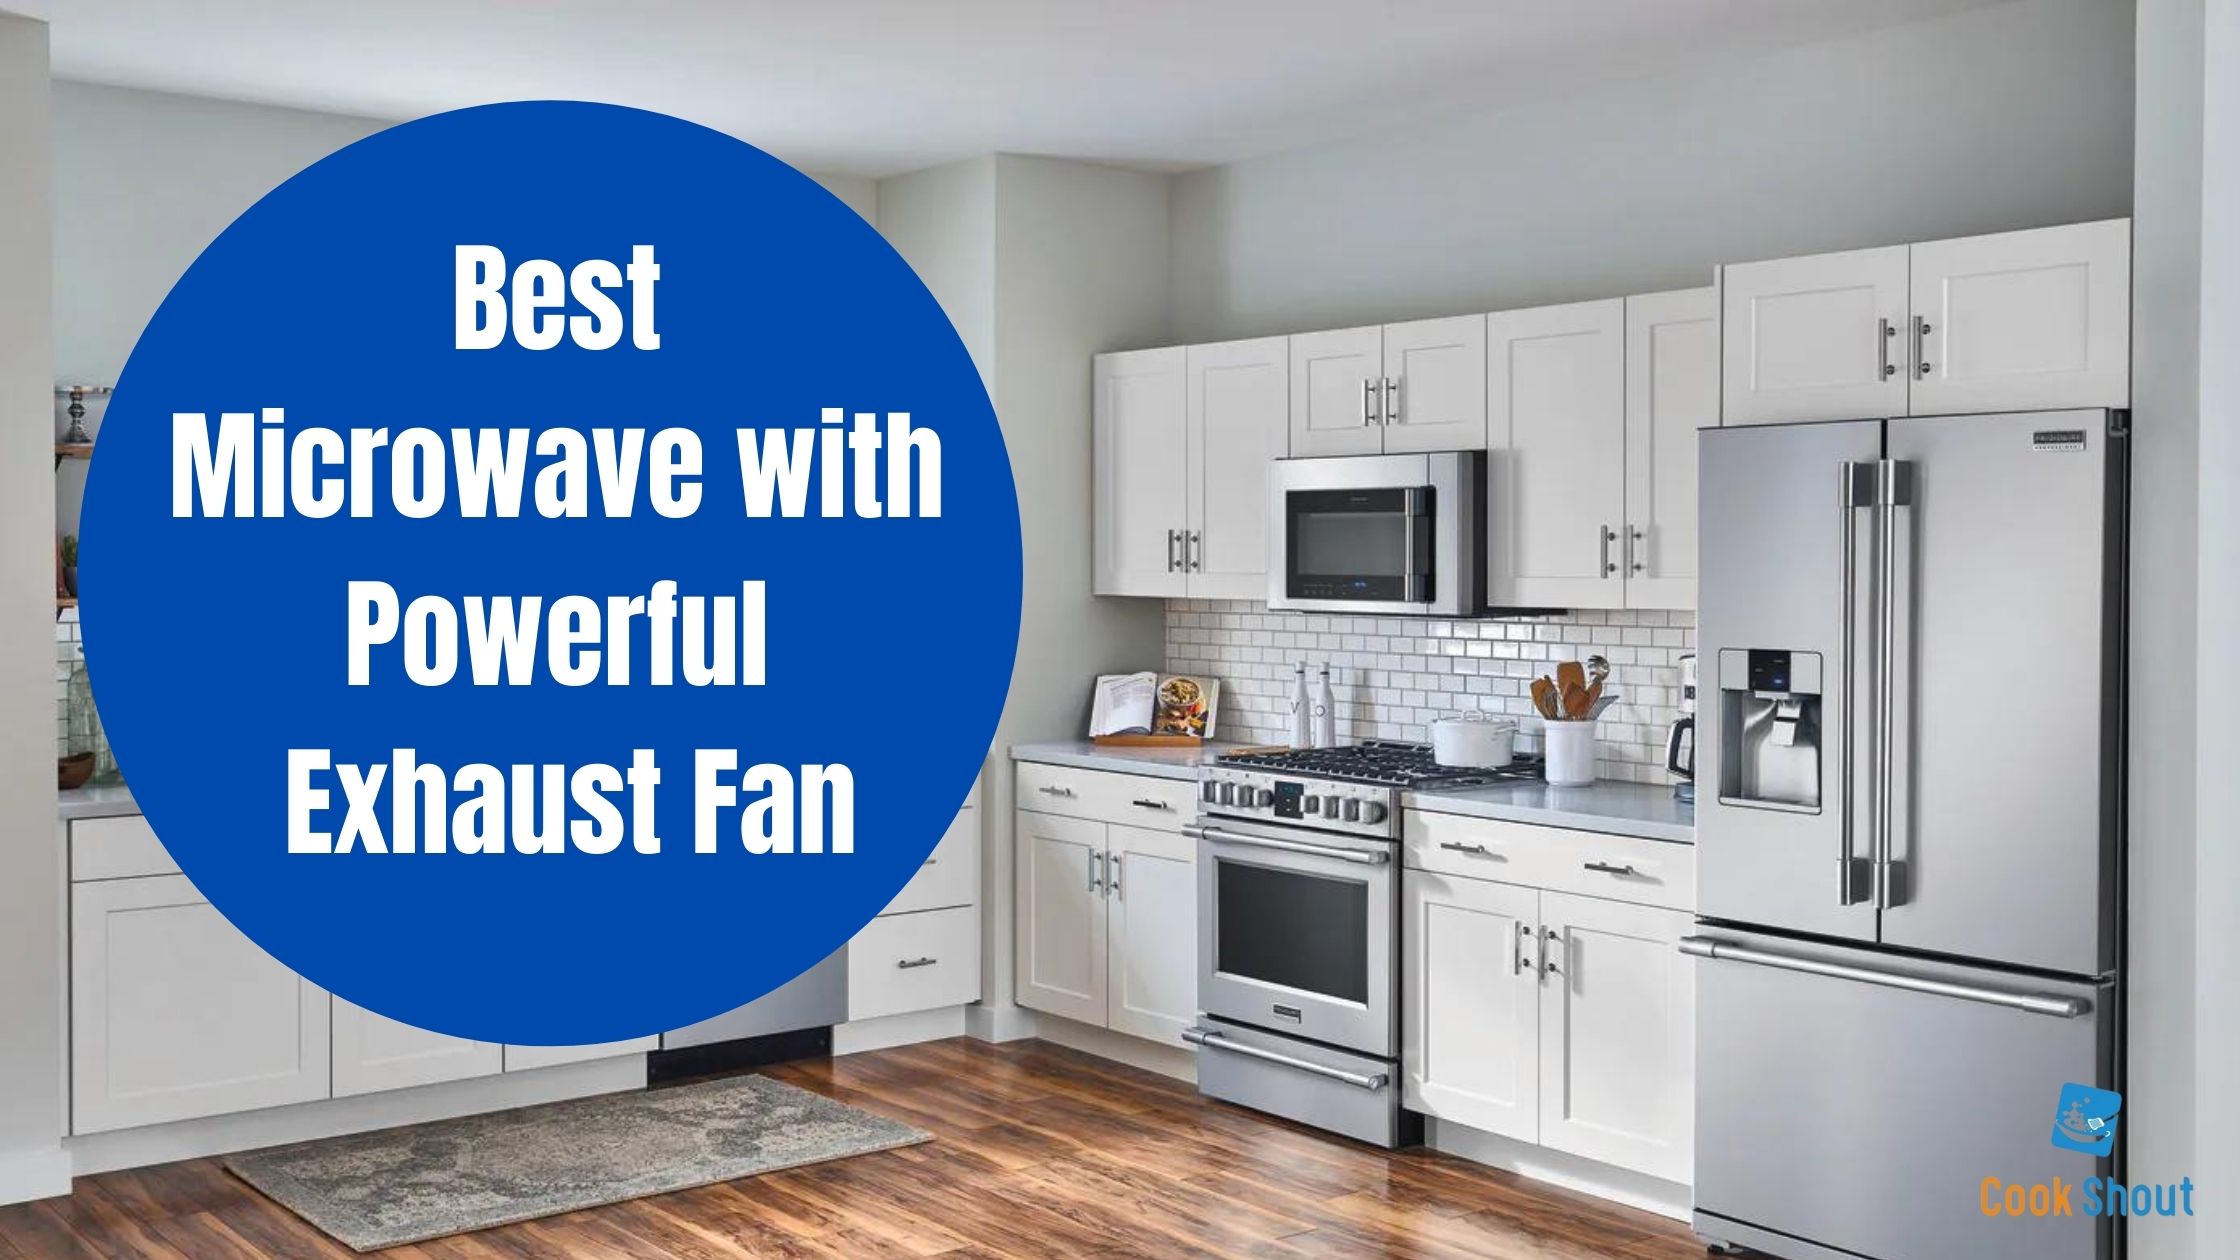 Best Microwave with Powerful Exhaust Fan